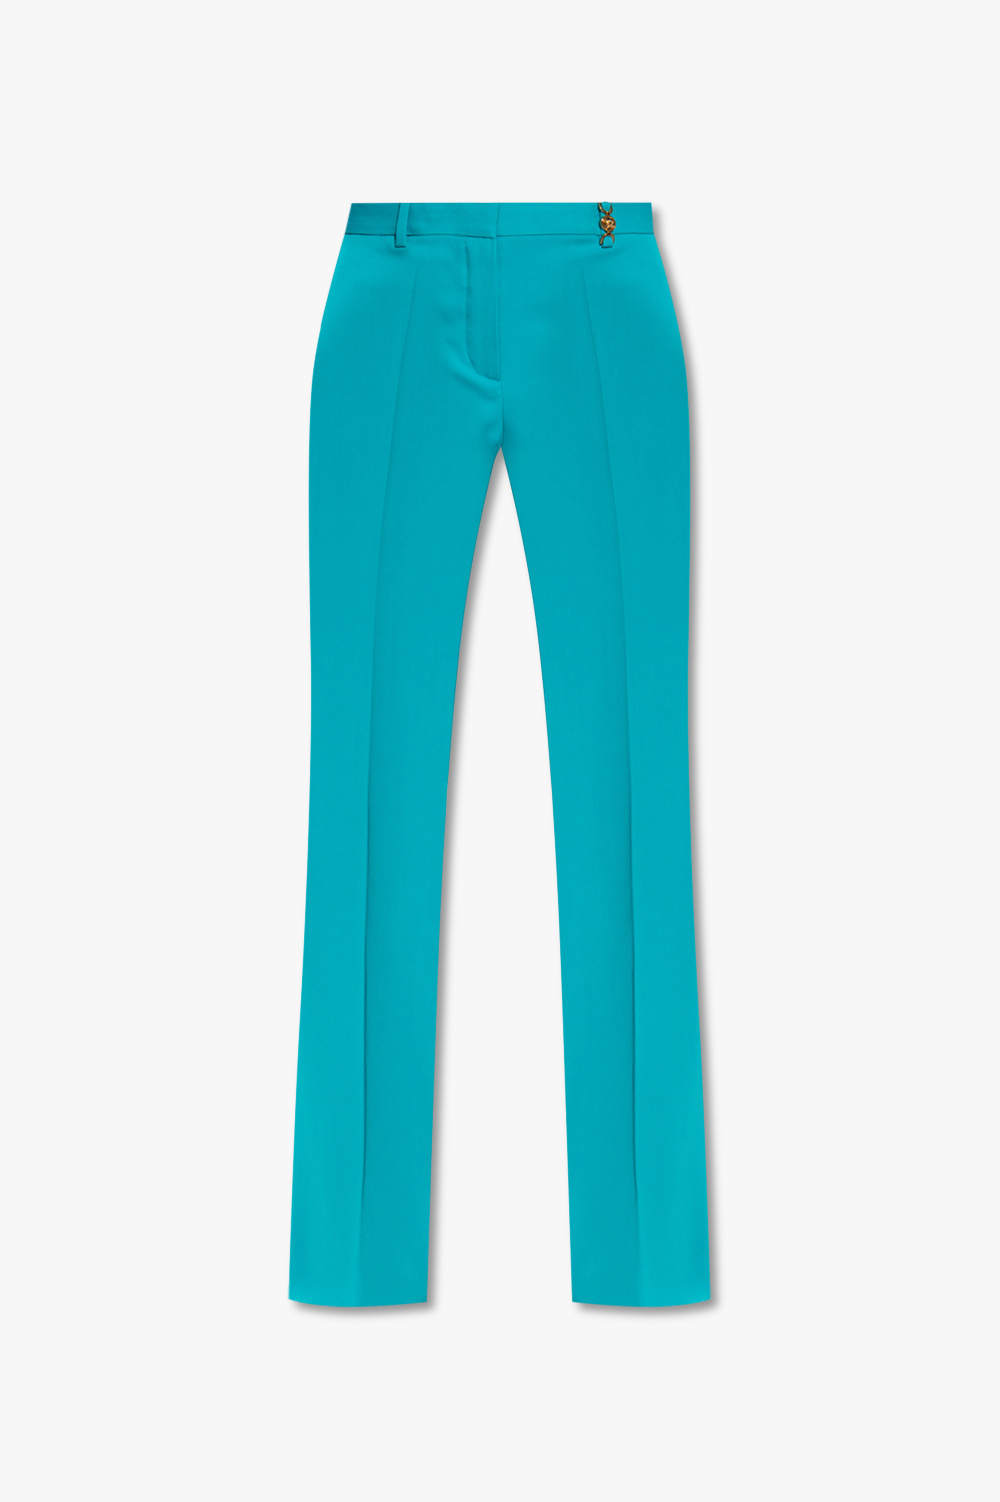 Jeans Louise Francoise Women's flared trousers: for sale at 16.99